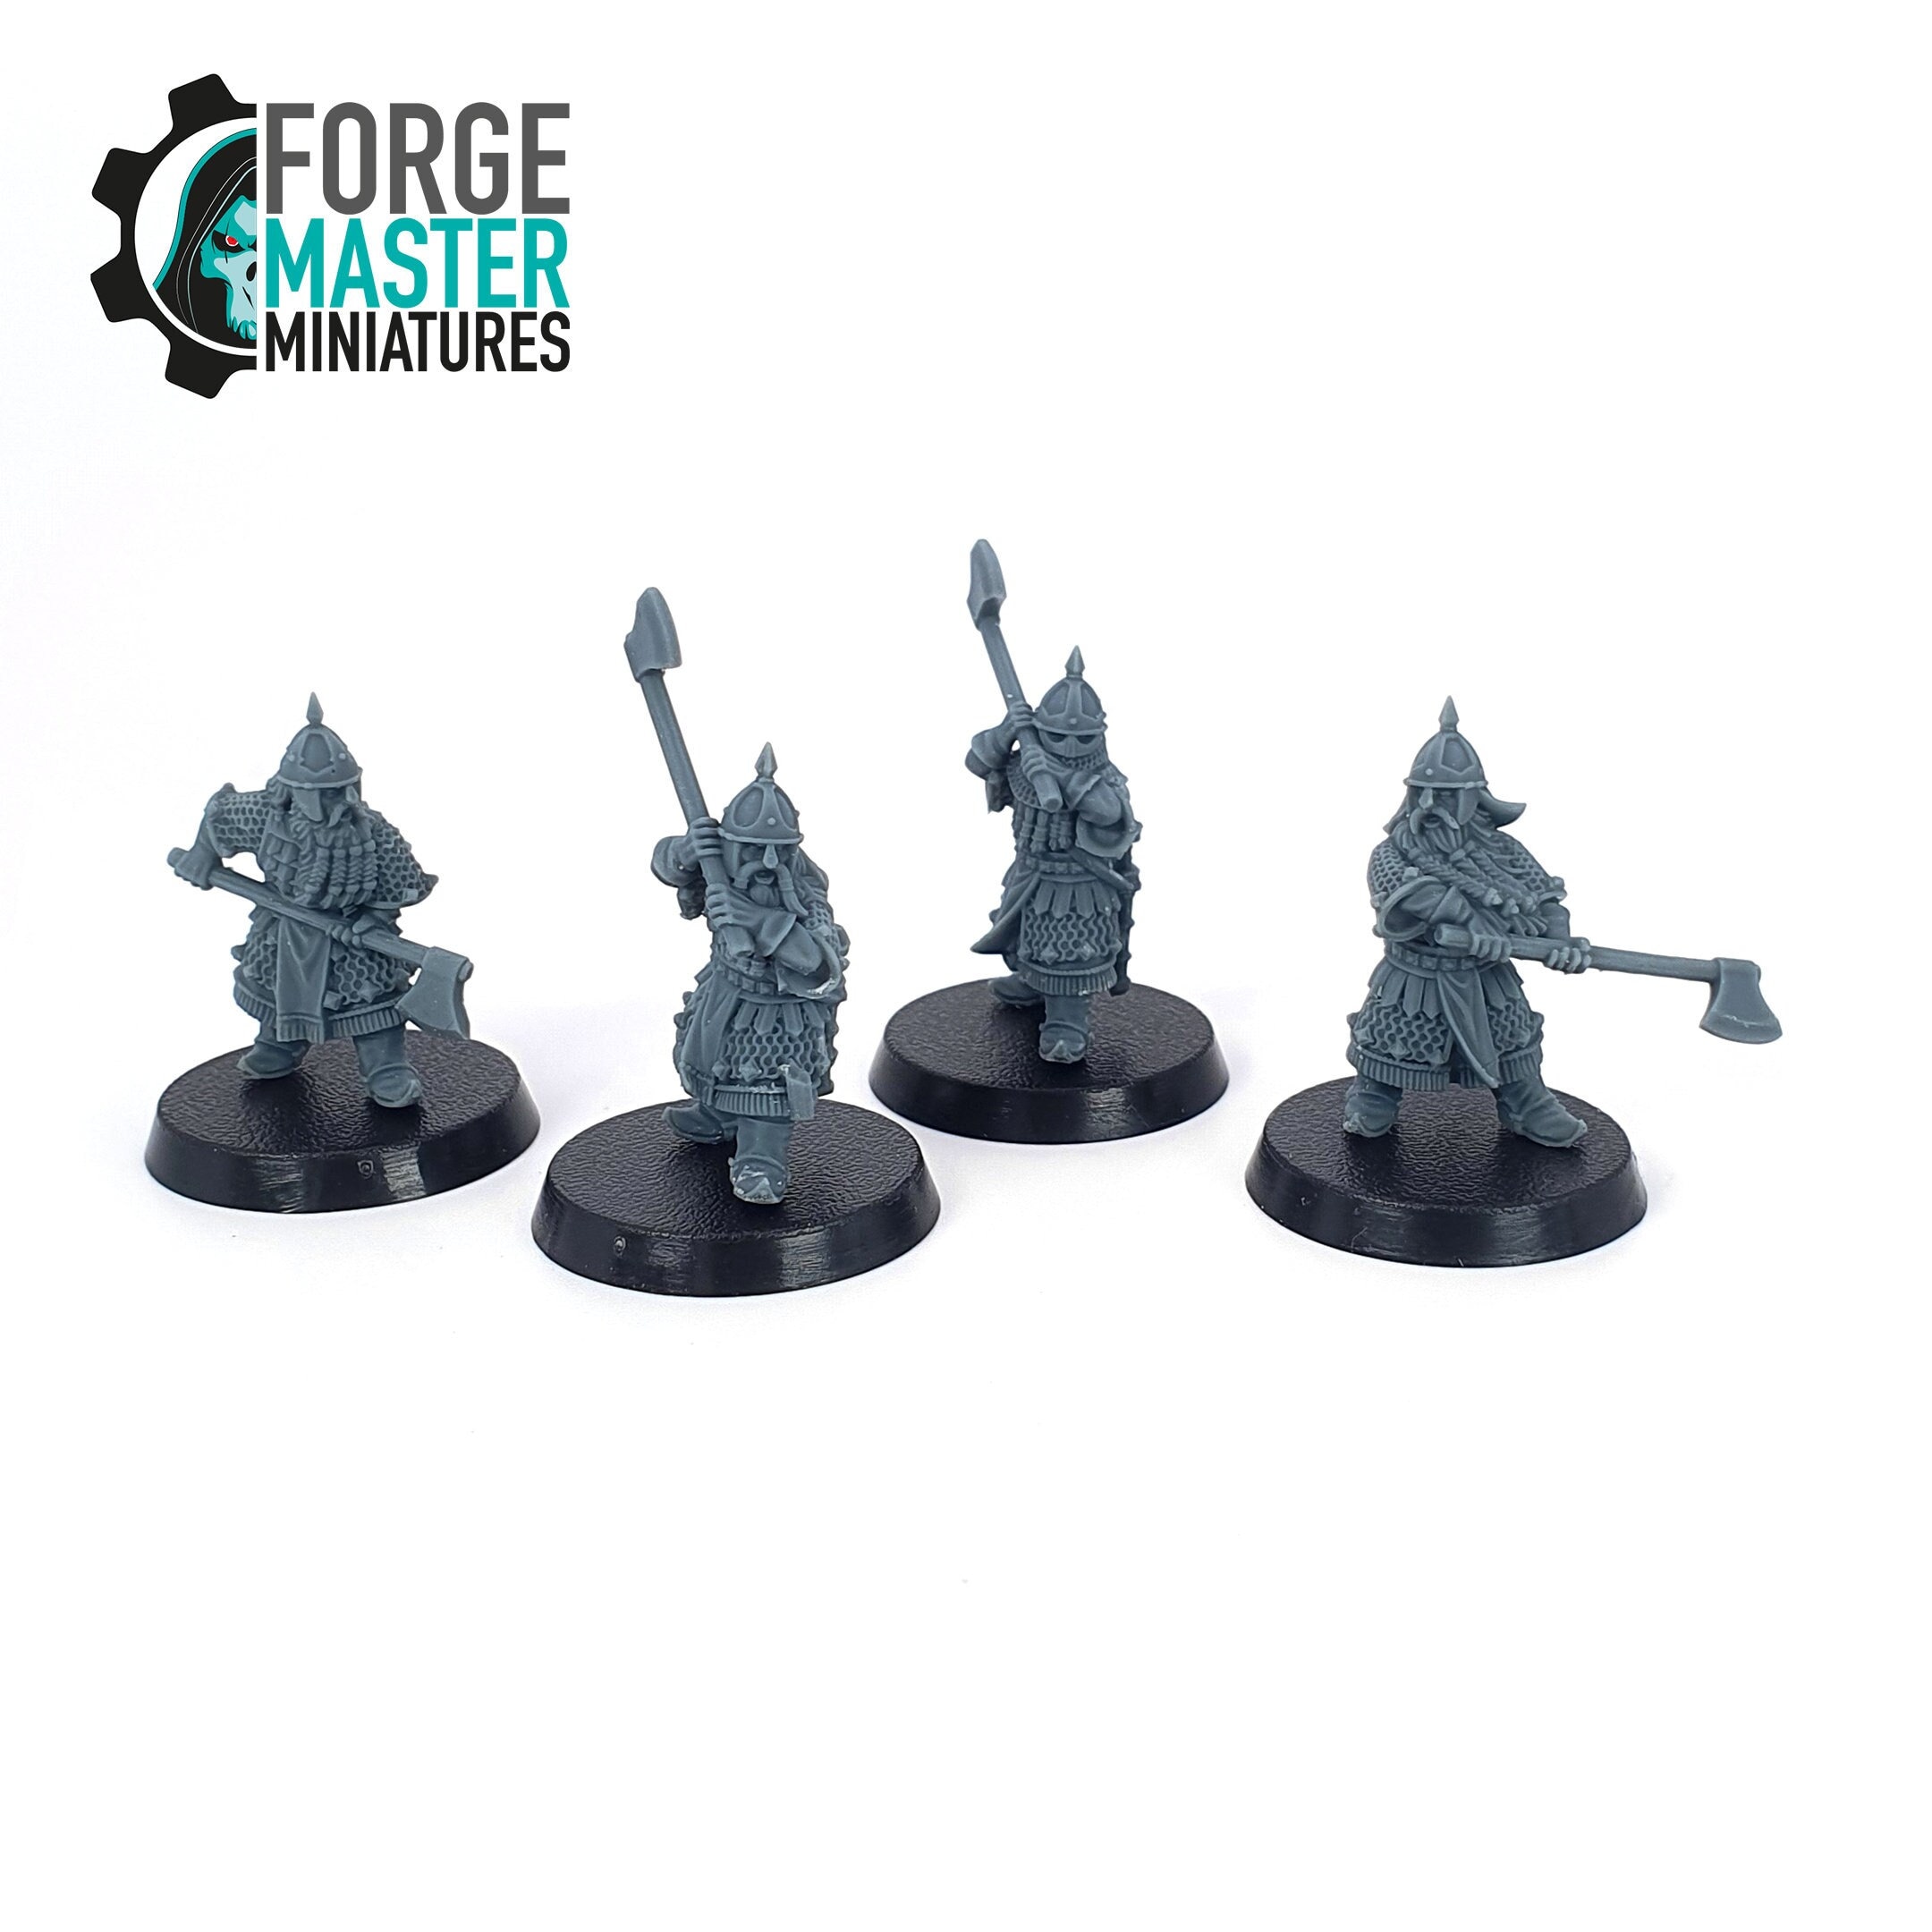 Eastern Dwarves with Axes wargaming miniatures by Medbury Miniatures 3D printed by Forgemaster Miniatures